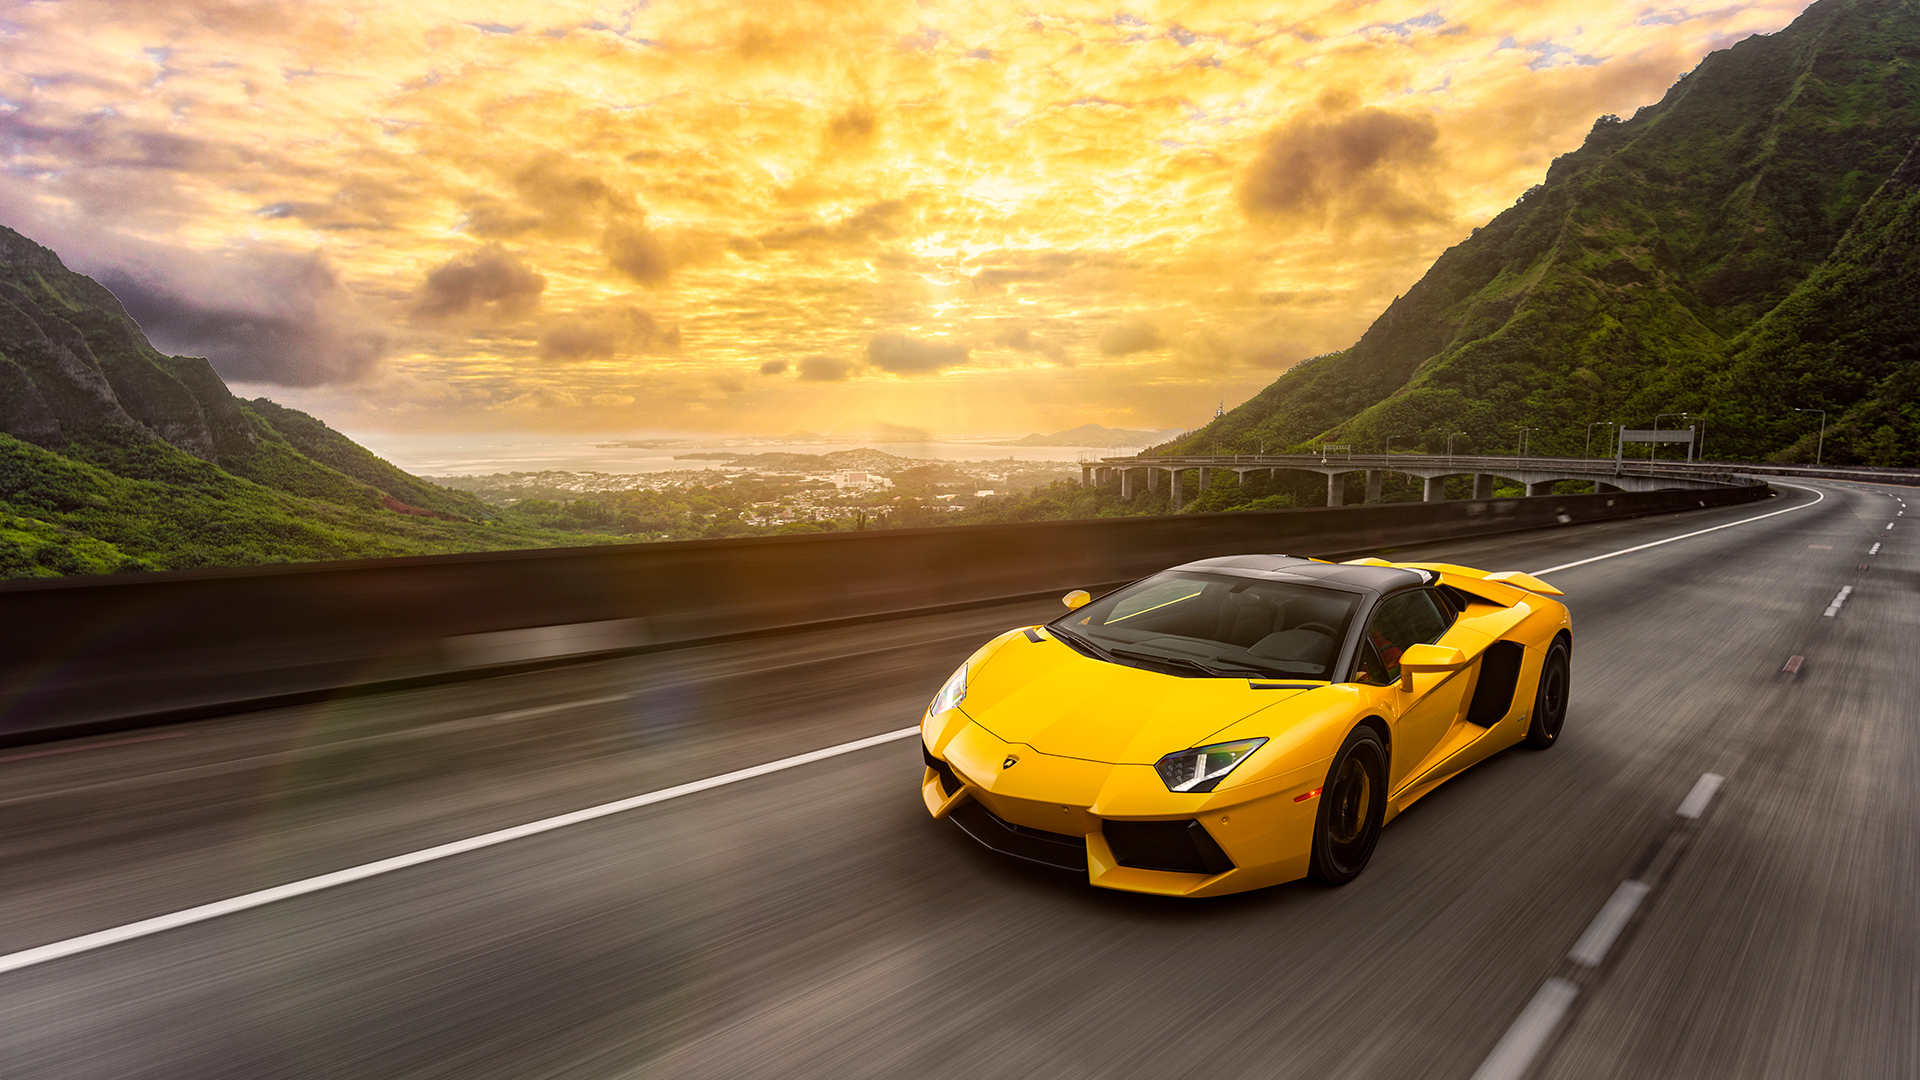 Lamborghini Aventador 2016 1, HD Cars, 4k Wallpapers, Images, Backgrounds, Photos and Pictures